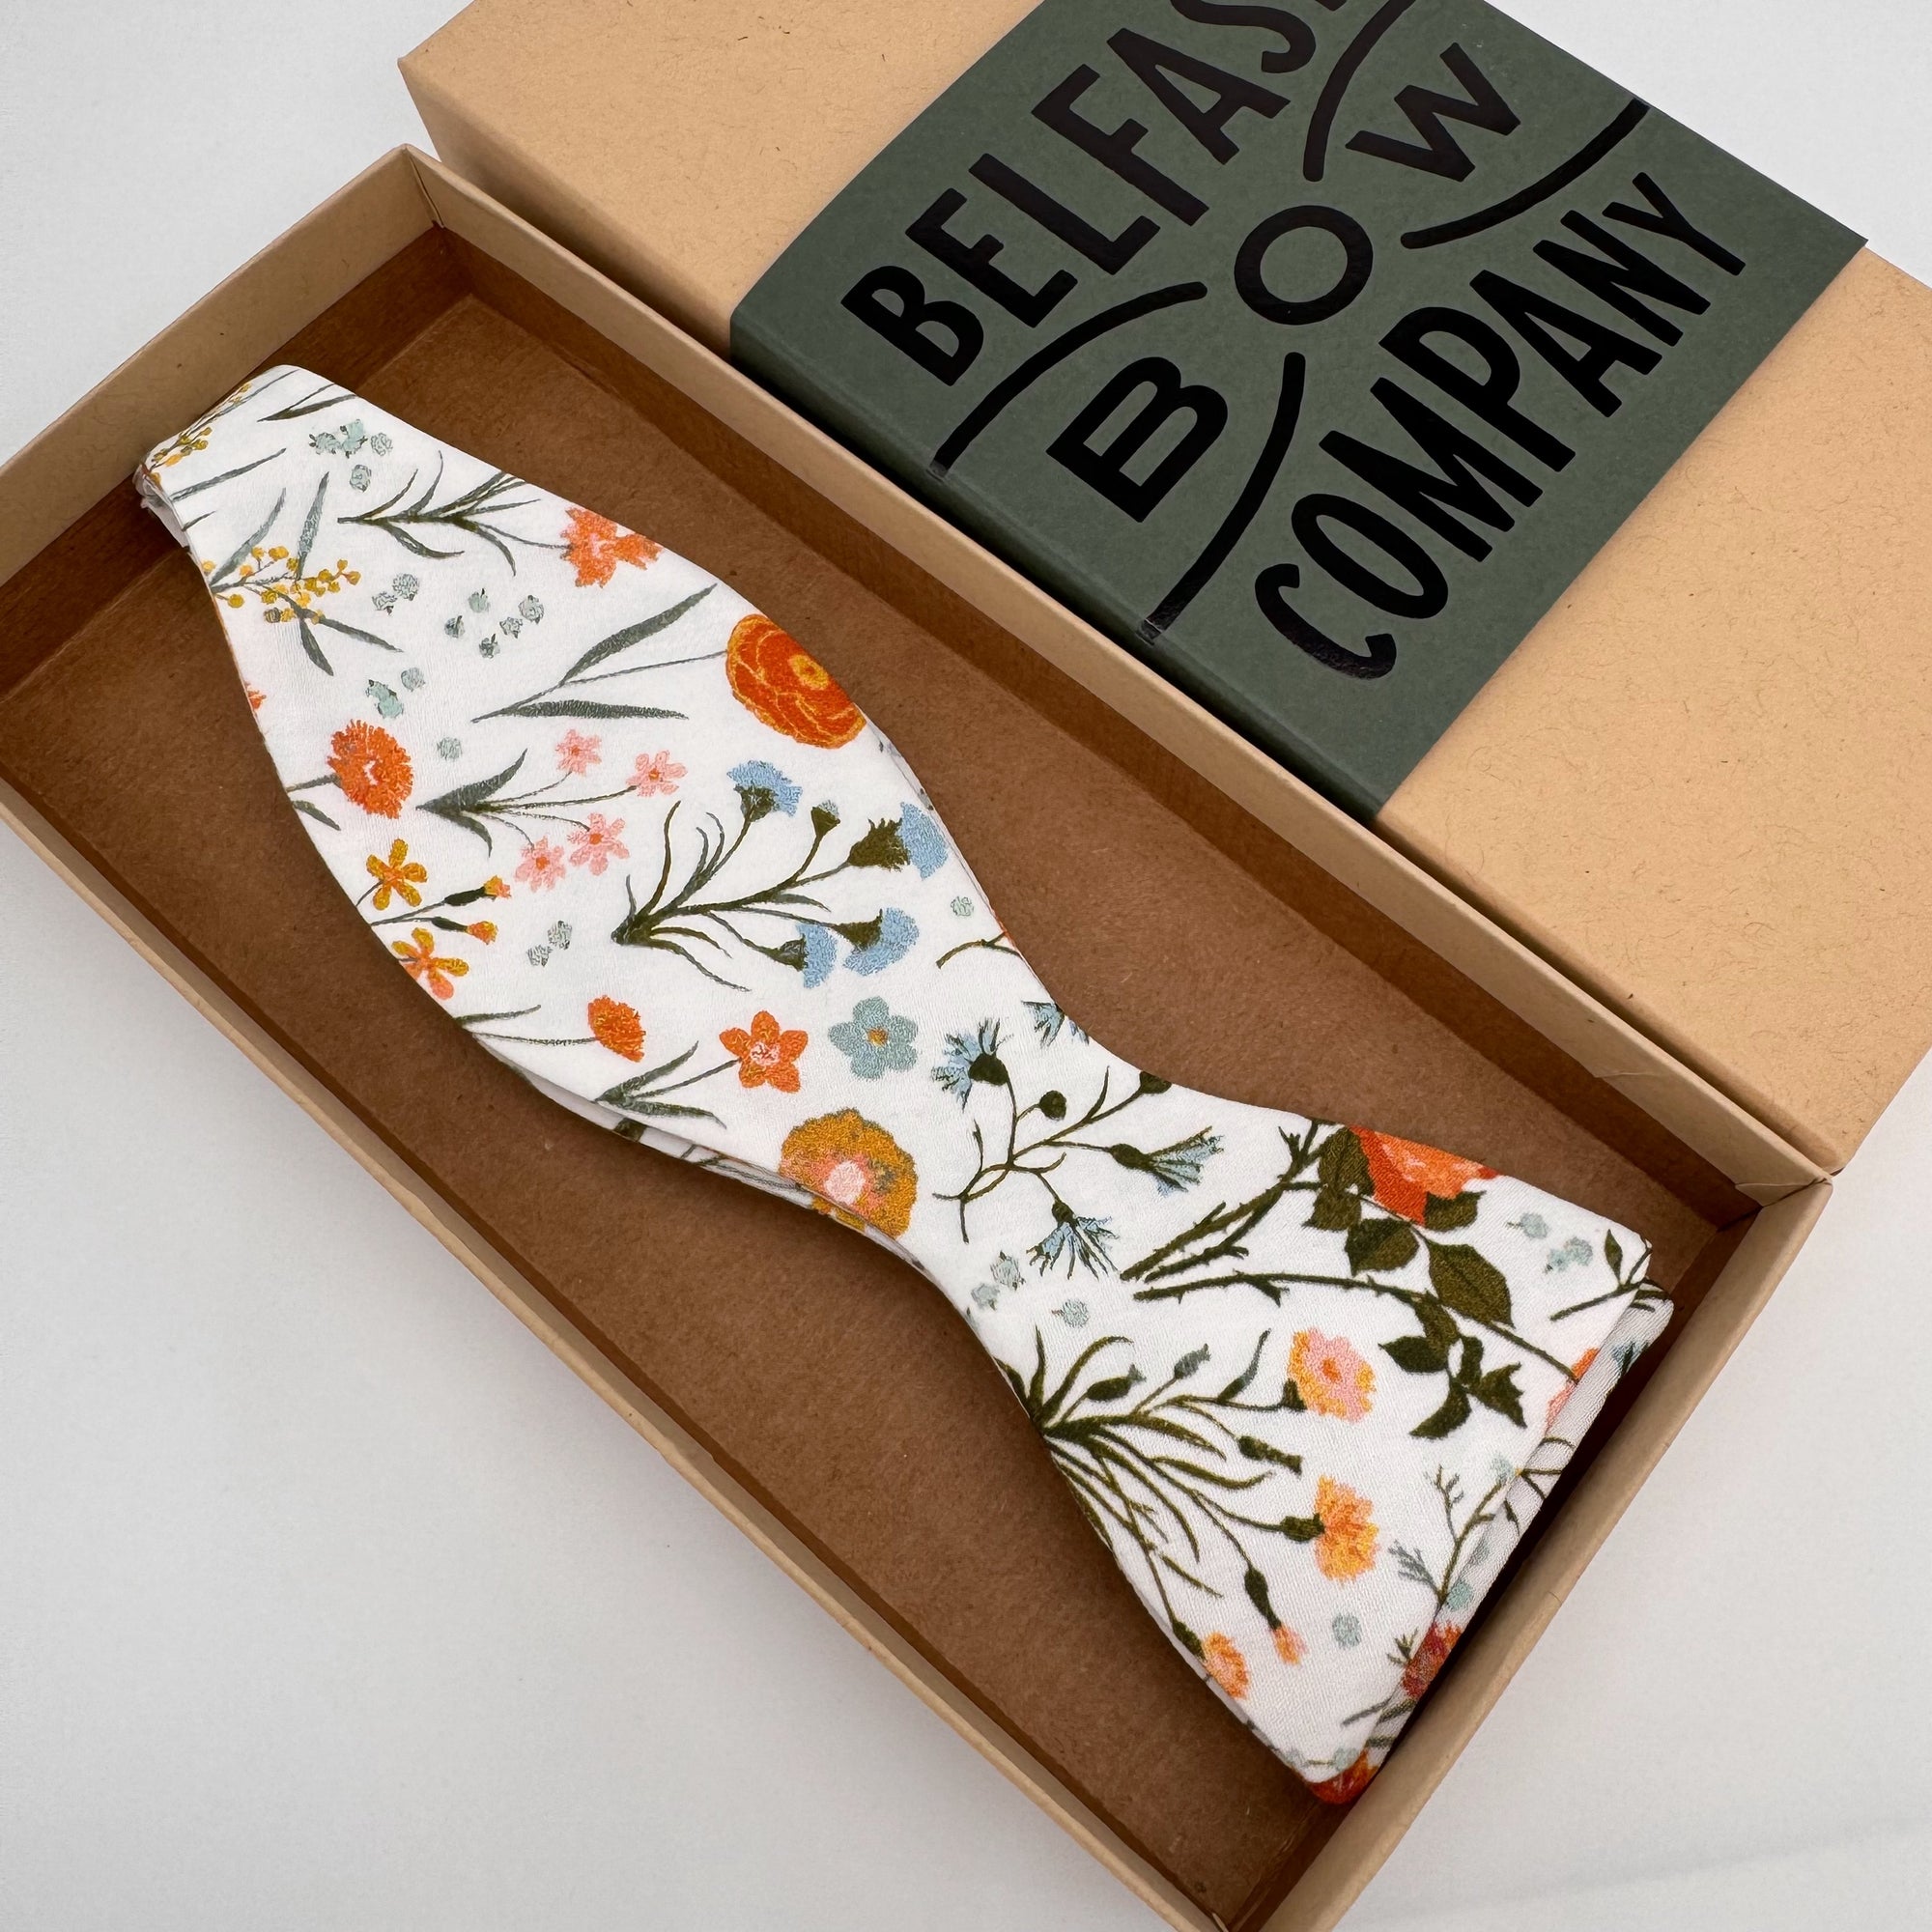 Self-Tie Bow Tie in Sage Green, White and Coral by the Belfast Bow Company